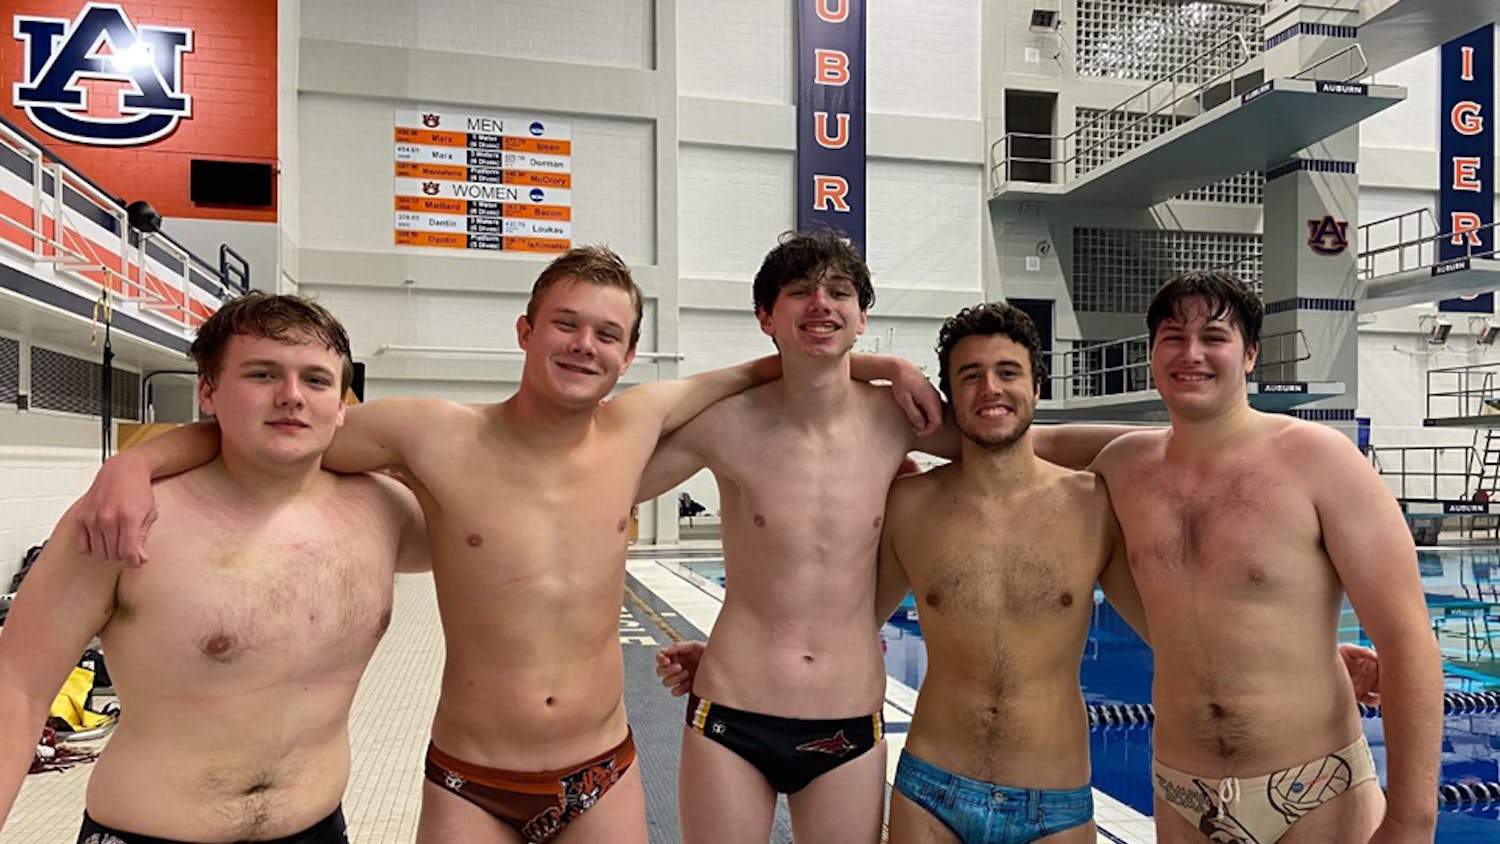 The Gamecock Water Polo Club at Auburn University for the Chris Young Tournament on Jan 29, 2022.